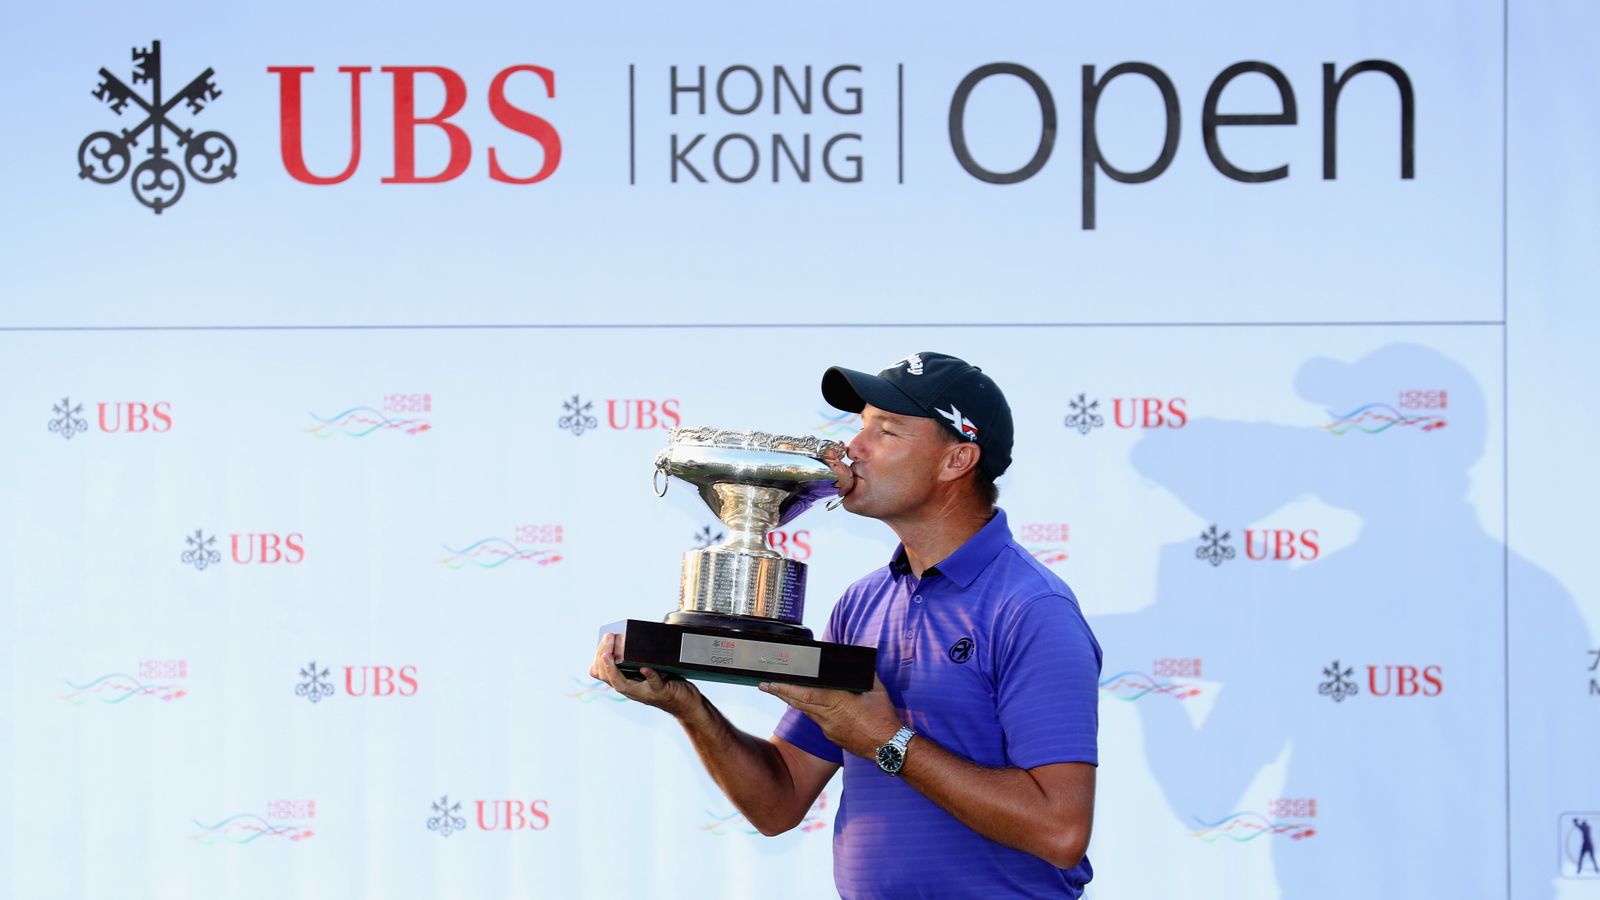 Sam Brazel to feature on European Tour after Hong Kong Open victory